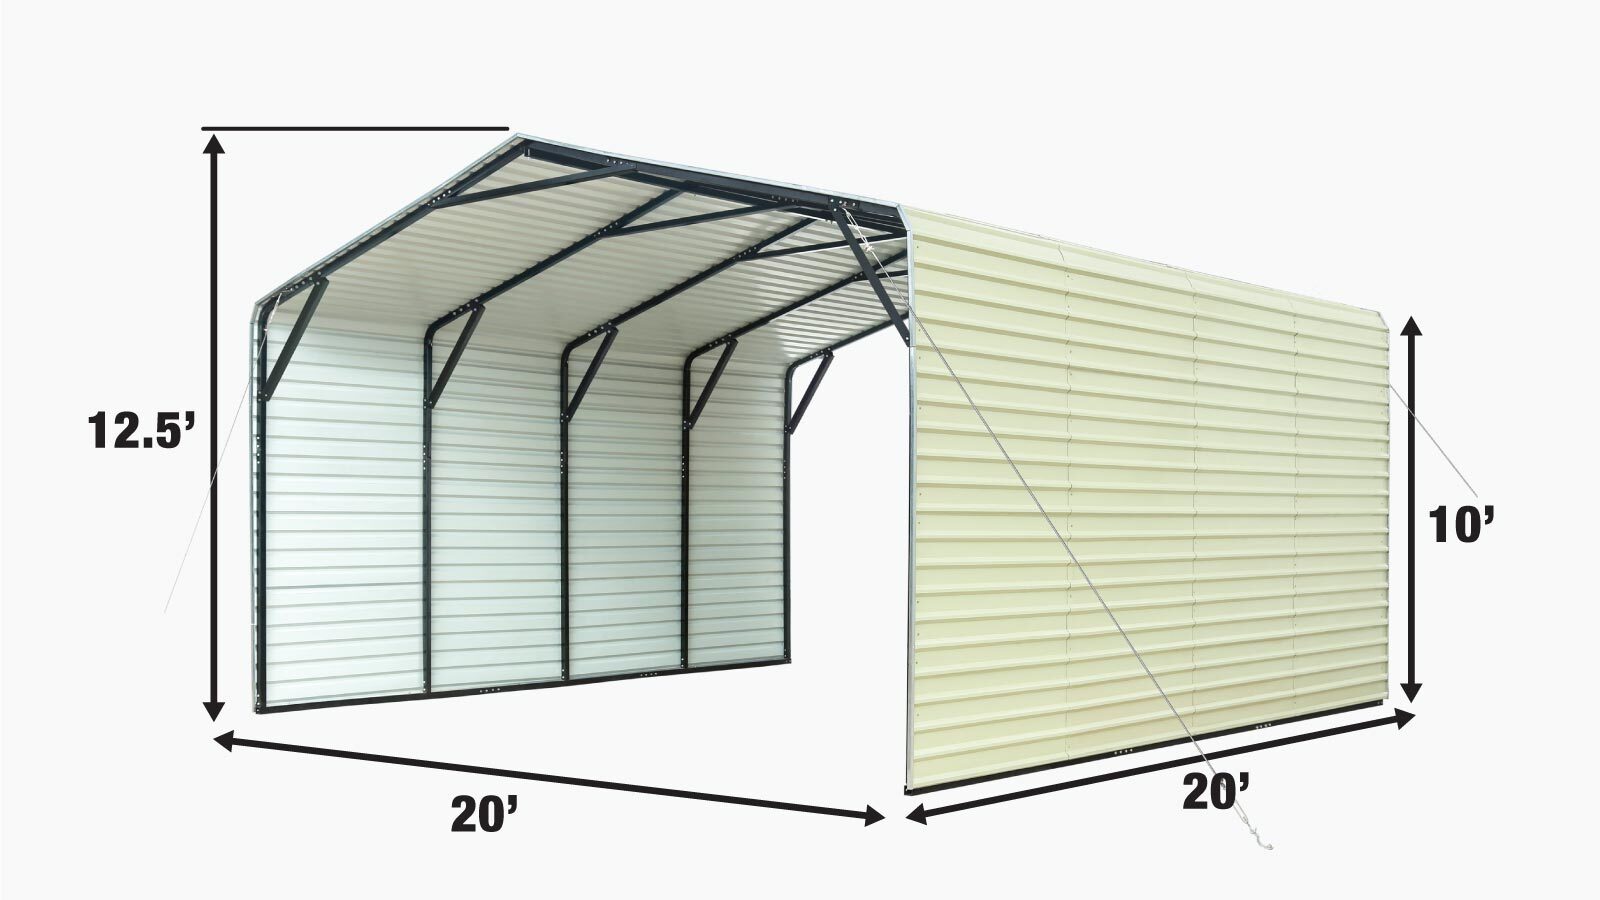 TMG Industrial 20’ x 20’ All-Steel Carport w/10’ Enclosed Sidewalls, Galvanized Roof, Powder Coated, Polyester Paint Coating, Stabilizing Cables, TMG-CP2020F-specifications-image